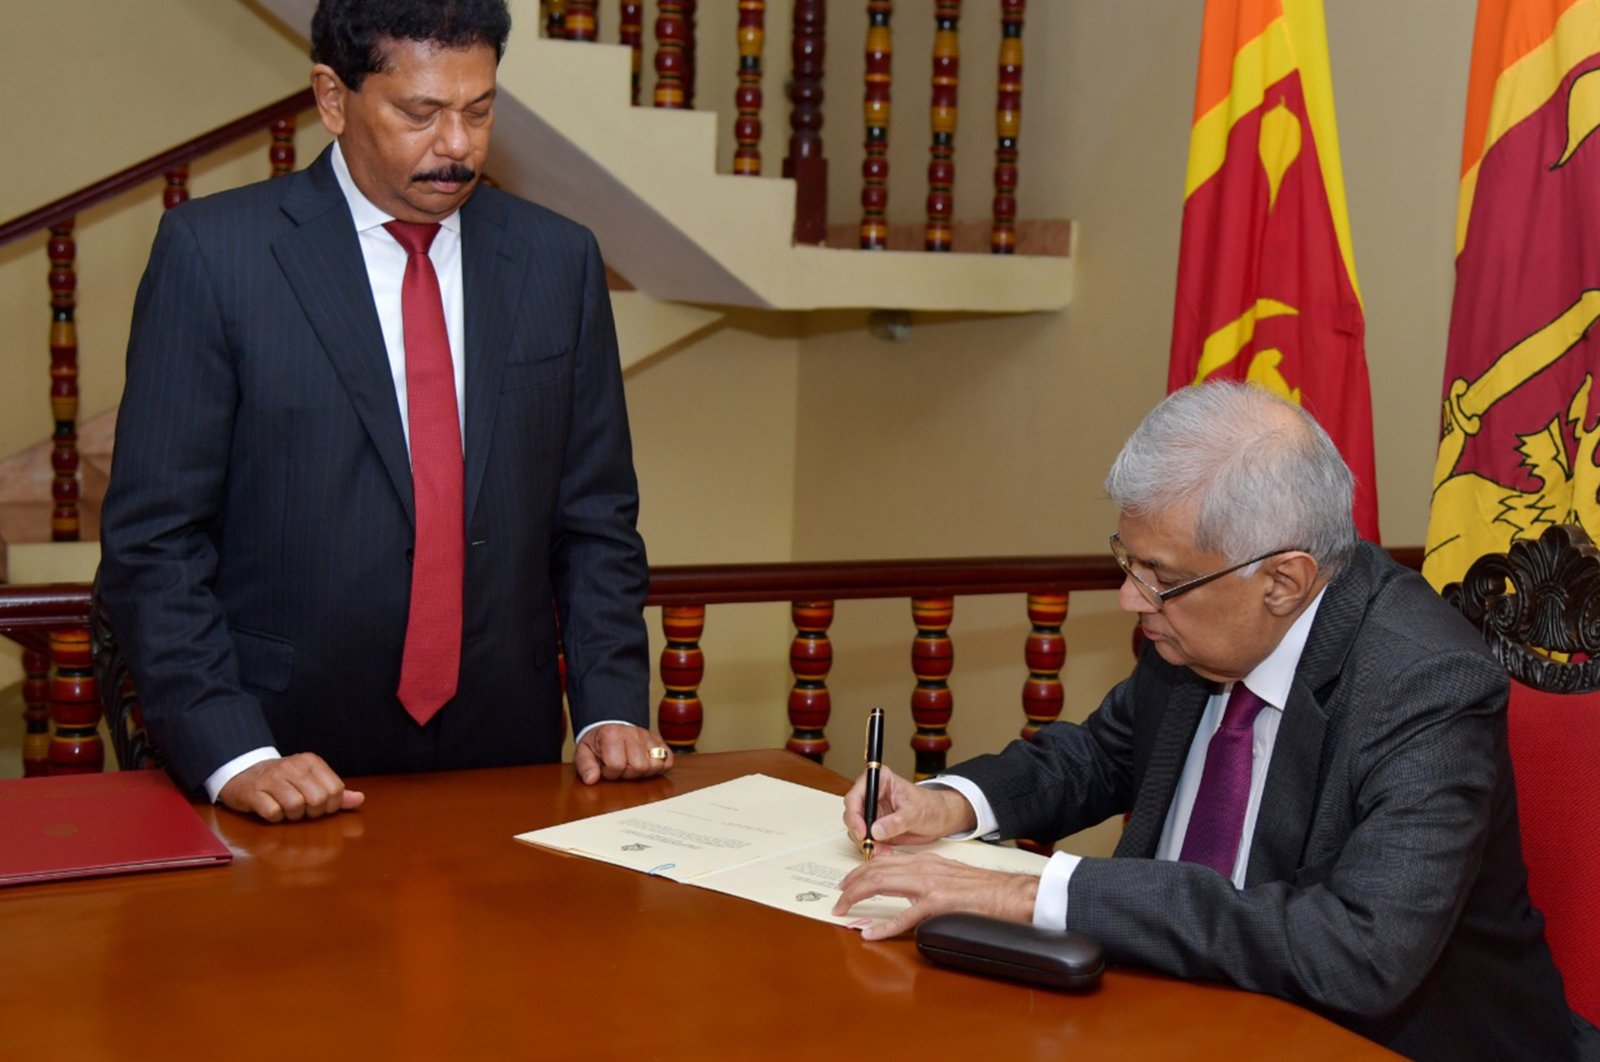 A handout photo made available by the Sri Lankan President&#039;s Media Division shows Sri Lankan Prime Minister Ranil Wickremesinghe (R) signing a document after taking the oath as interim president of Sri Lanka before Chief Justice Jayantha Jayasuriya (L), Colombo, Sri Lanka, 15 July 2022. (Sri Lankan President&#039;s Media Division via EPA Photo)